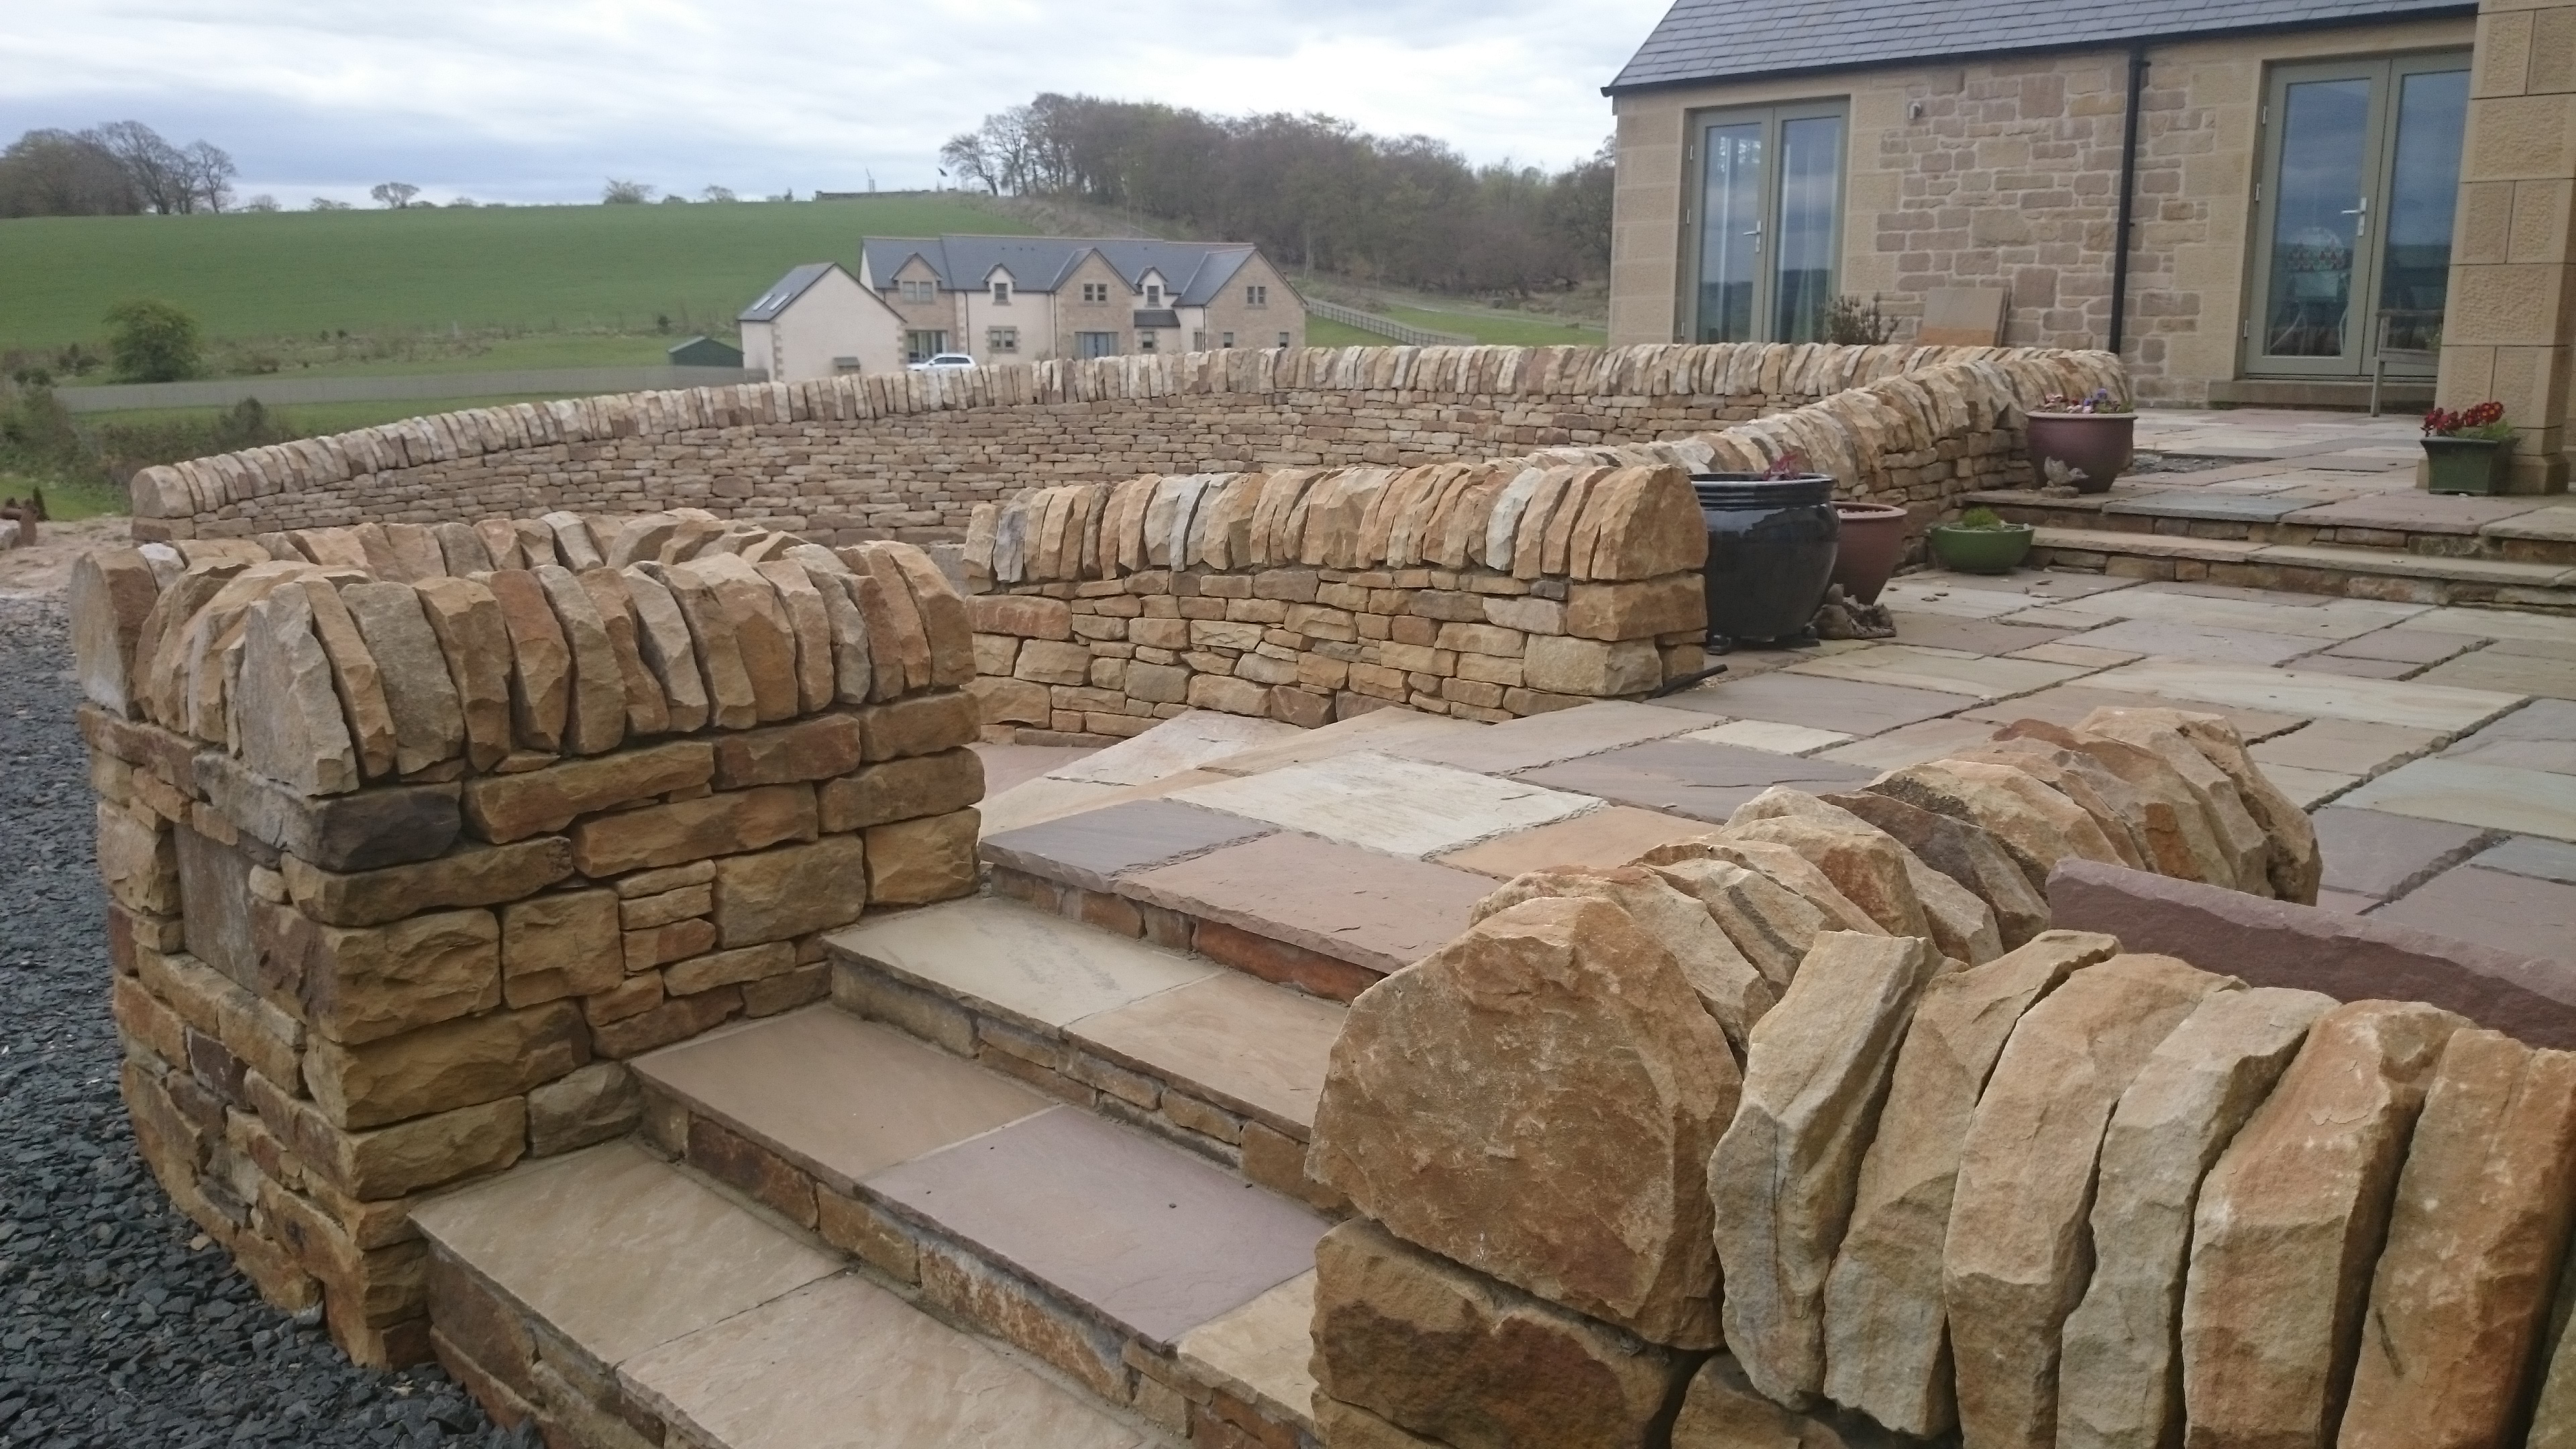 The finished dry stone wall